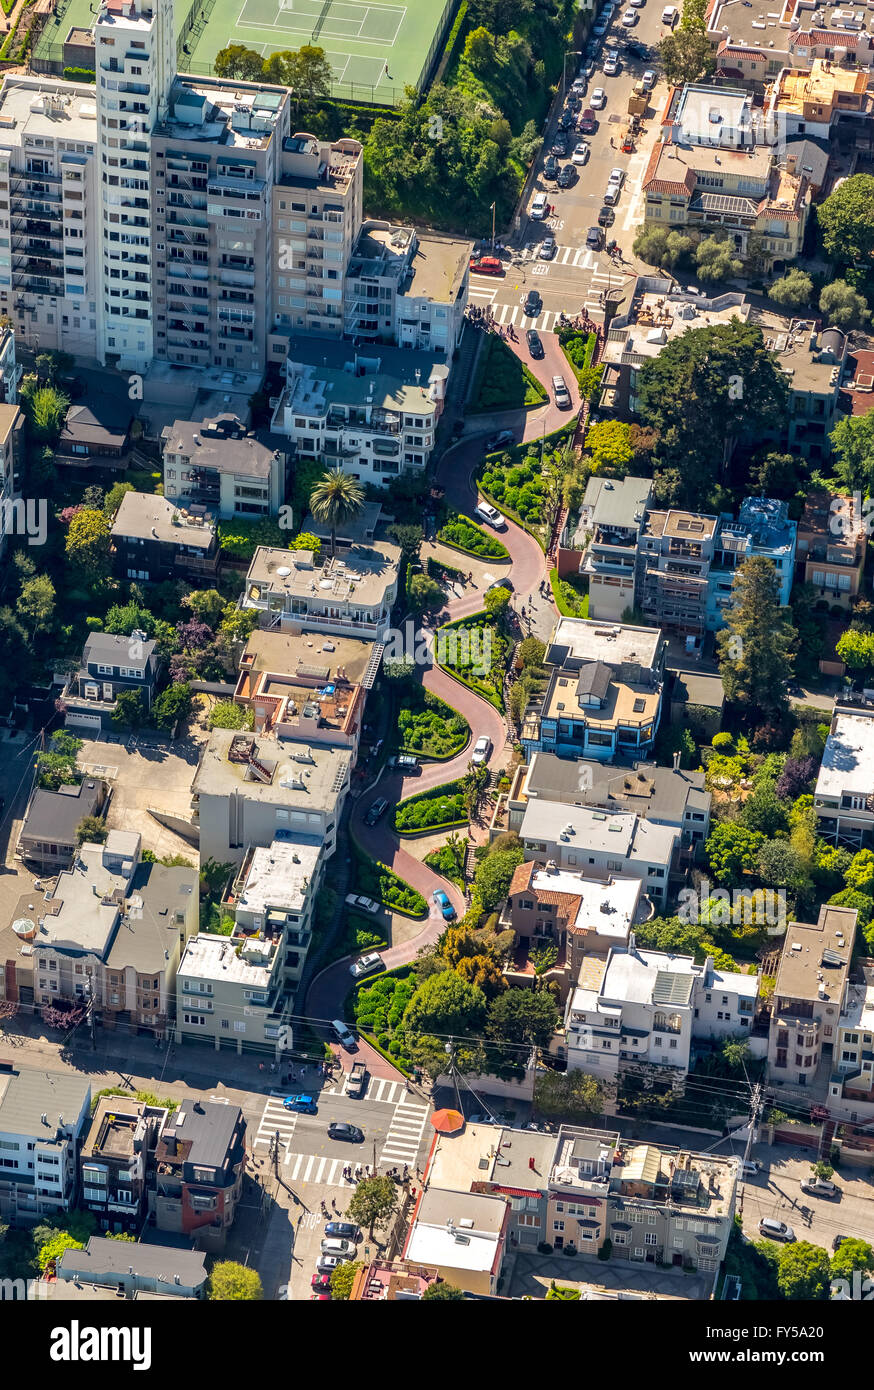 Aerial view, Lombard Street with hairpin turns, winding road, the streets of San Francisco, San Francisco Stock Photo